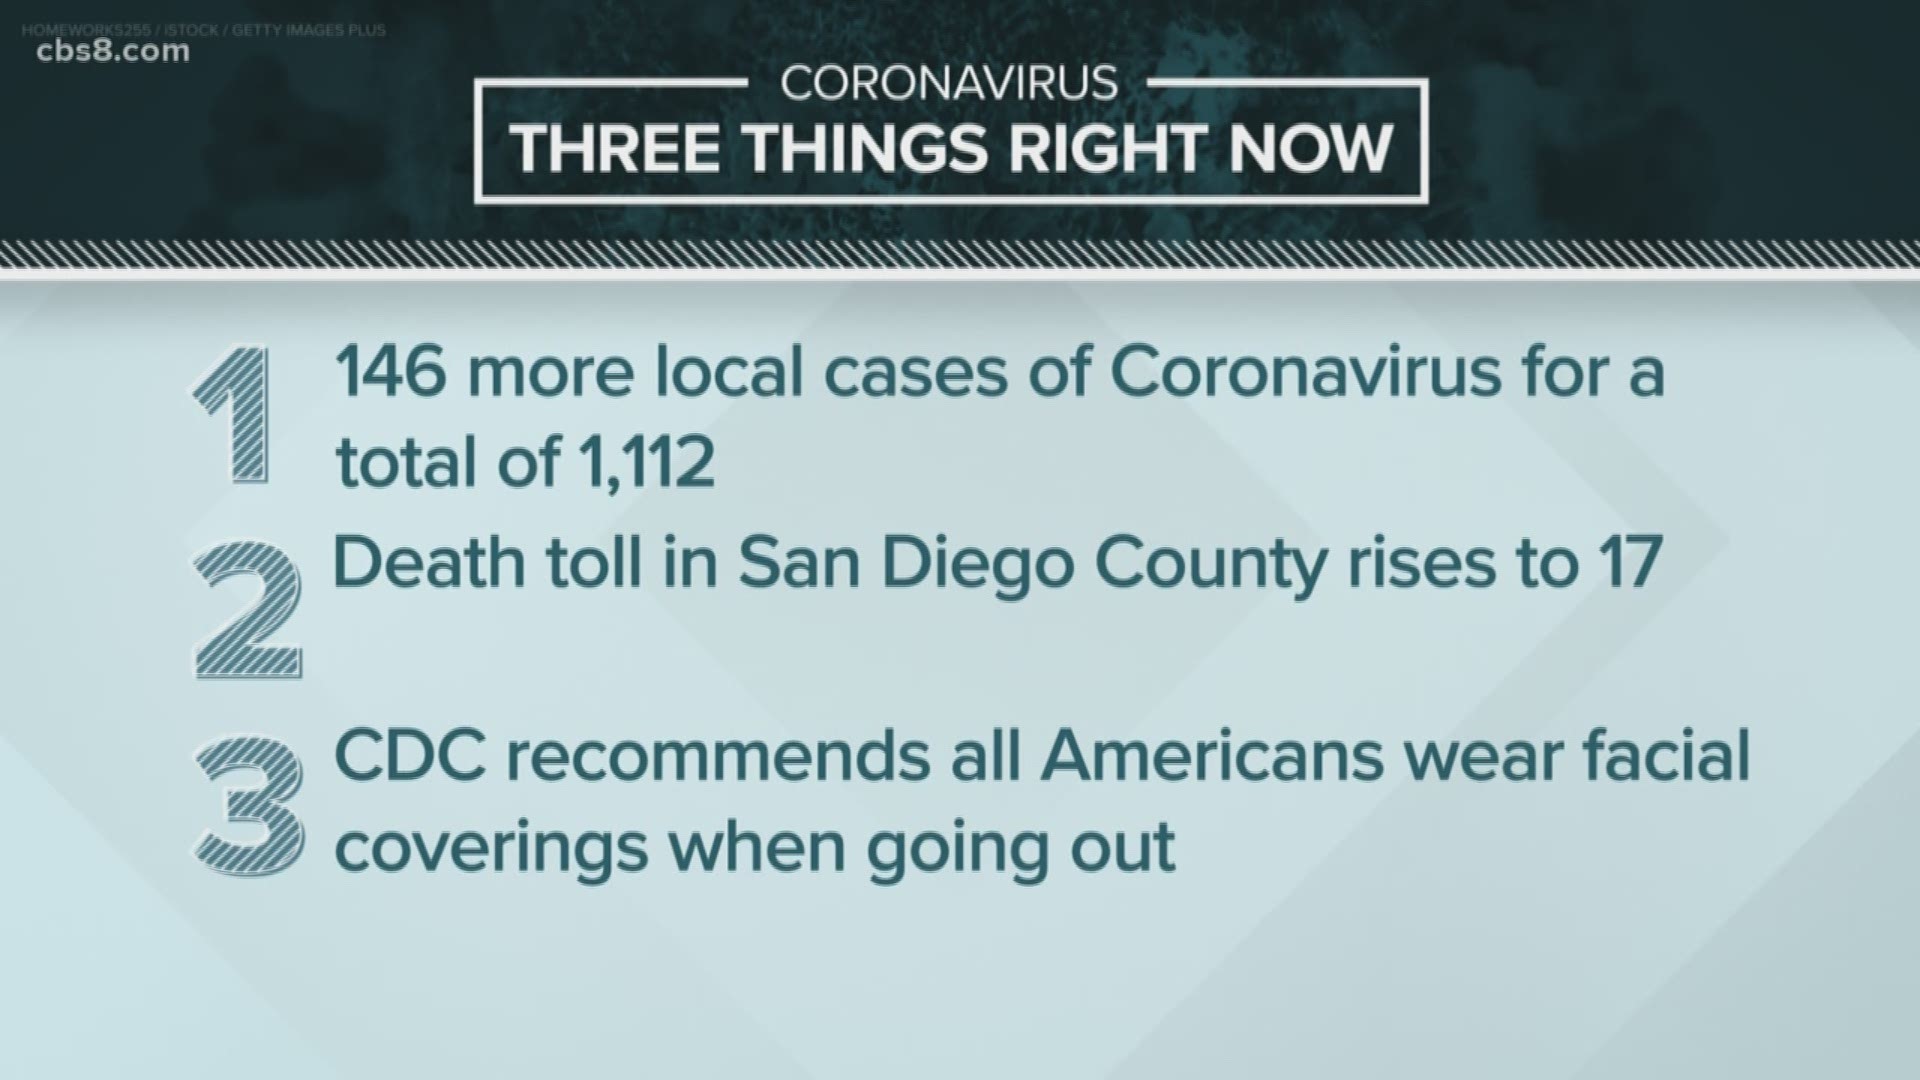 Here are the headlines you need to know about COVID-19 in San Diego County on Friday, April 3.